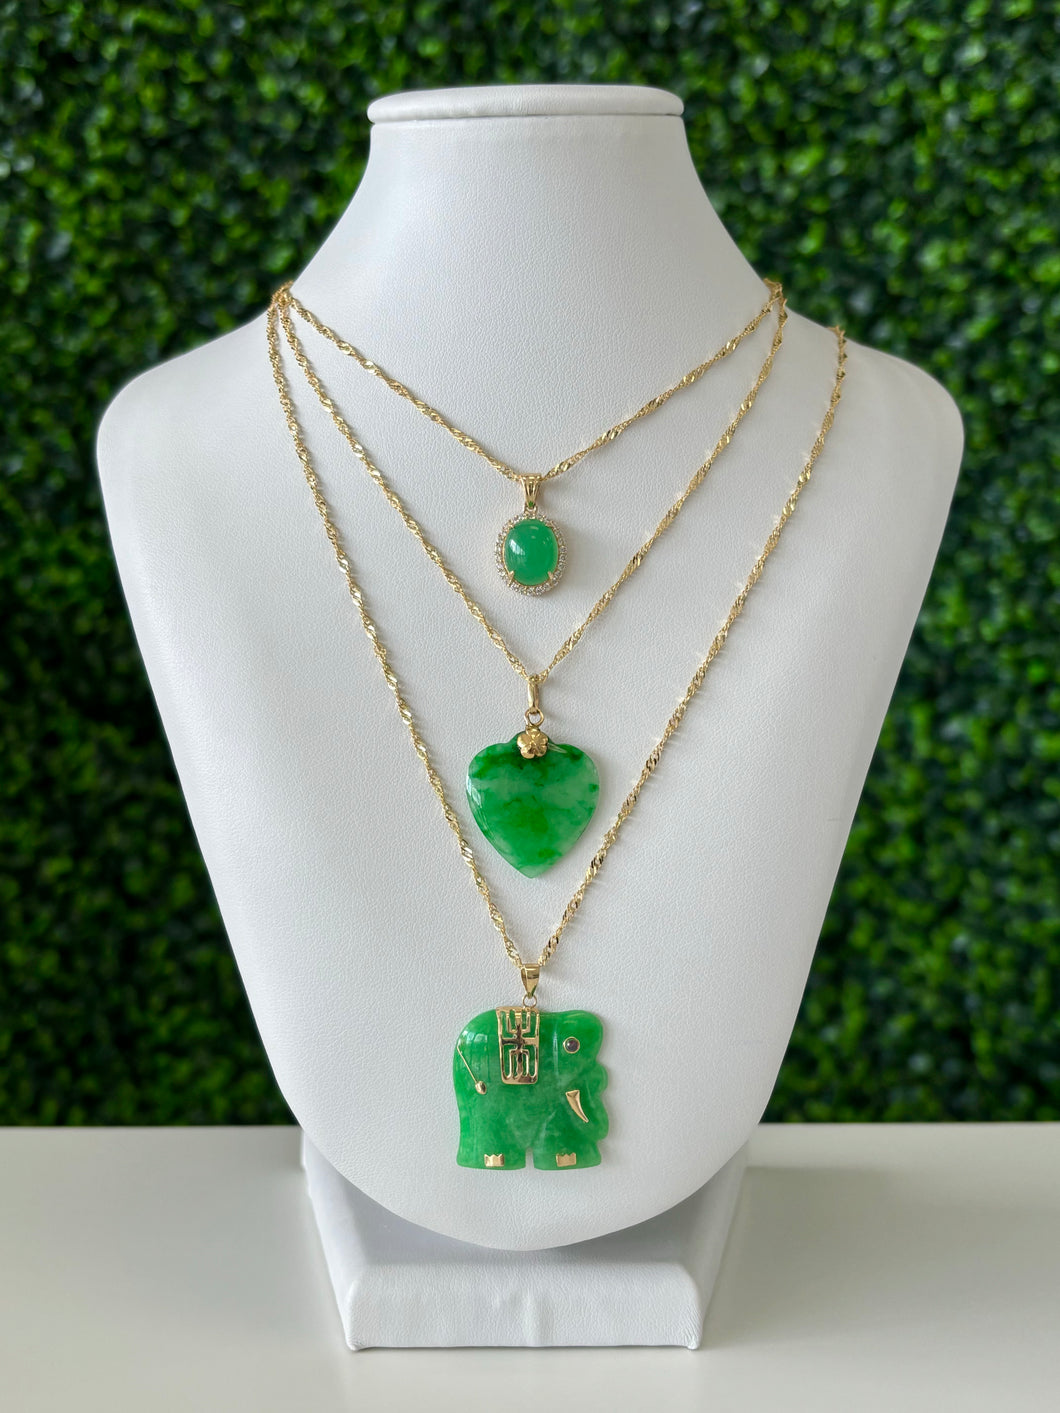 14kt Gold Genuine Jade Pendant with 14kt Singapore Chain